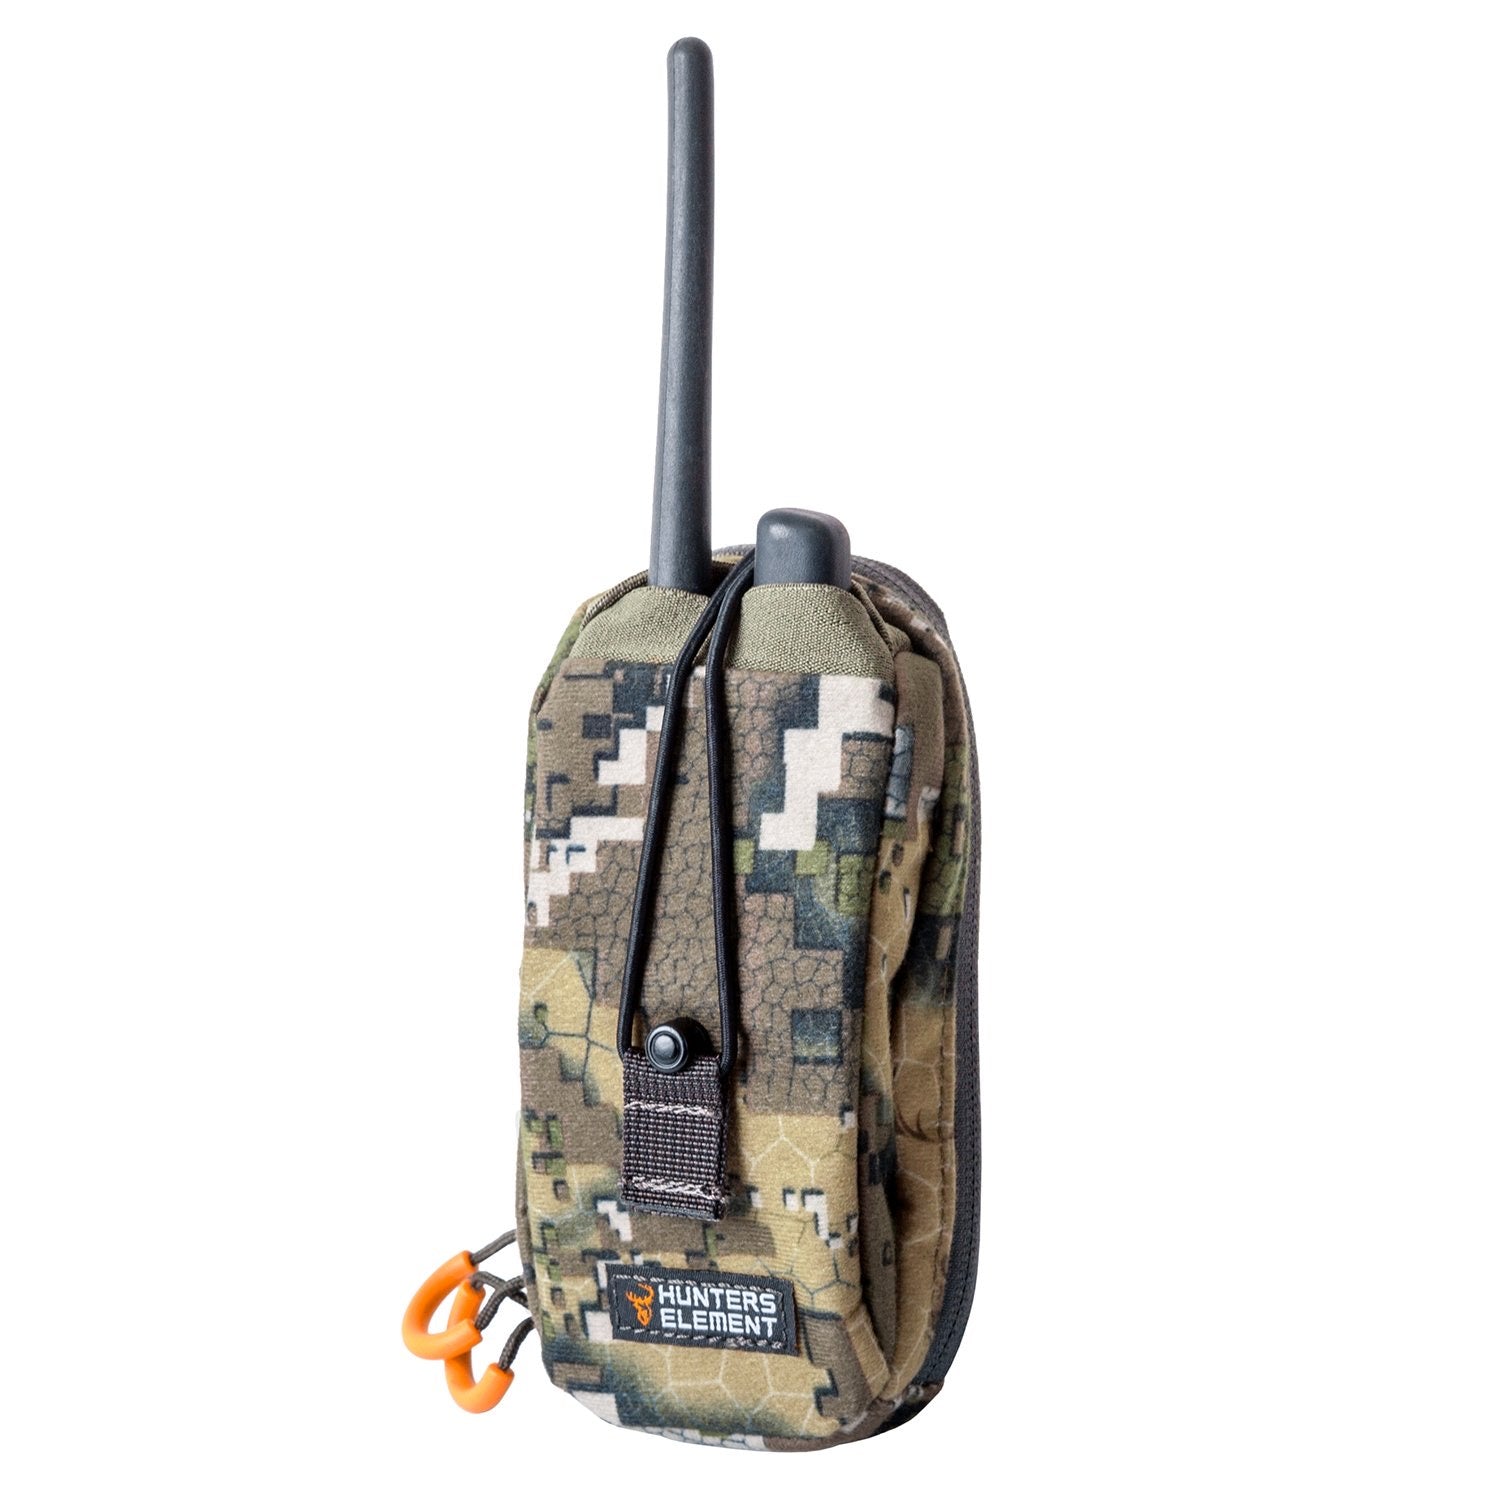 Hunters Element Latitude GPS Pouch Desolve Veil -  - Mansfield Hunting & Fishing - Products to prepare for Corona Virus